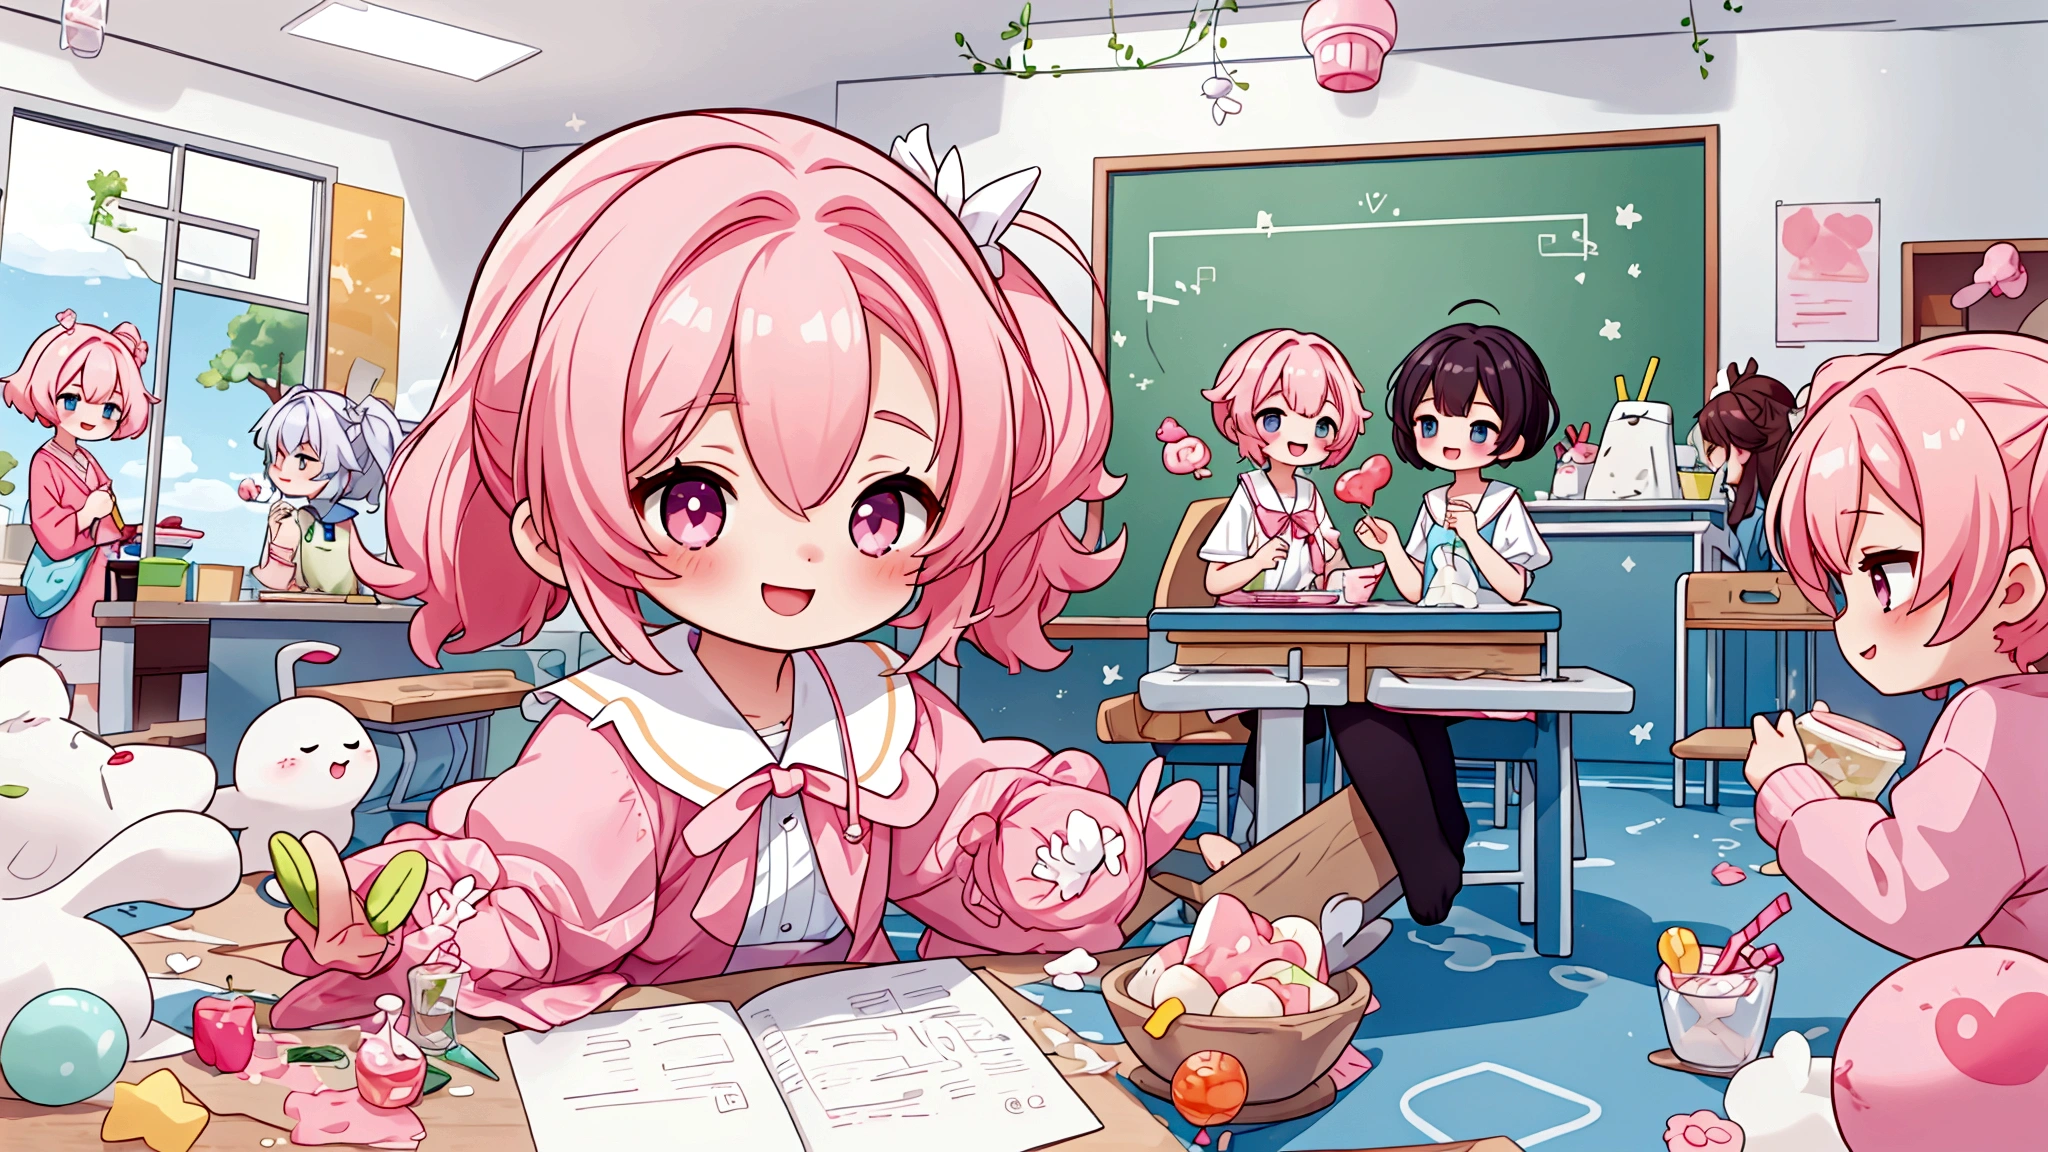 background: Soft pastel colours as the base、The background is plain with characters.: Pink haired girl in a white dress、They seem to be having fun in the classroom and at the cafe.。Smiling with sweets in hand。

atmosphere: It&#39;s like a snapshot of youth pursuing love and dreams.、A glittering, sparkling image。